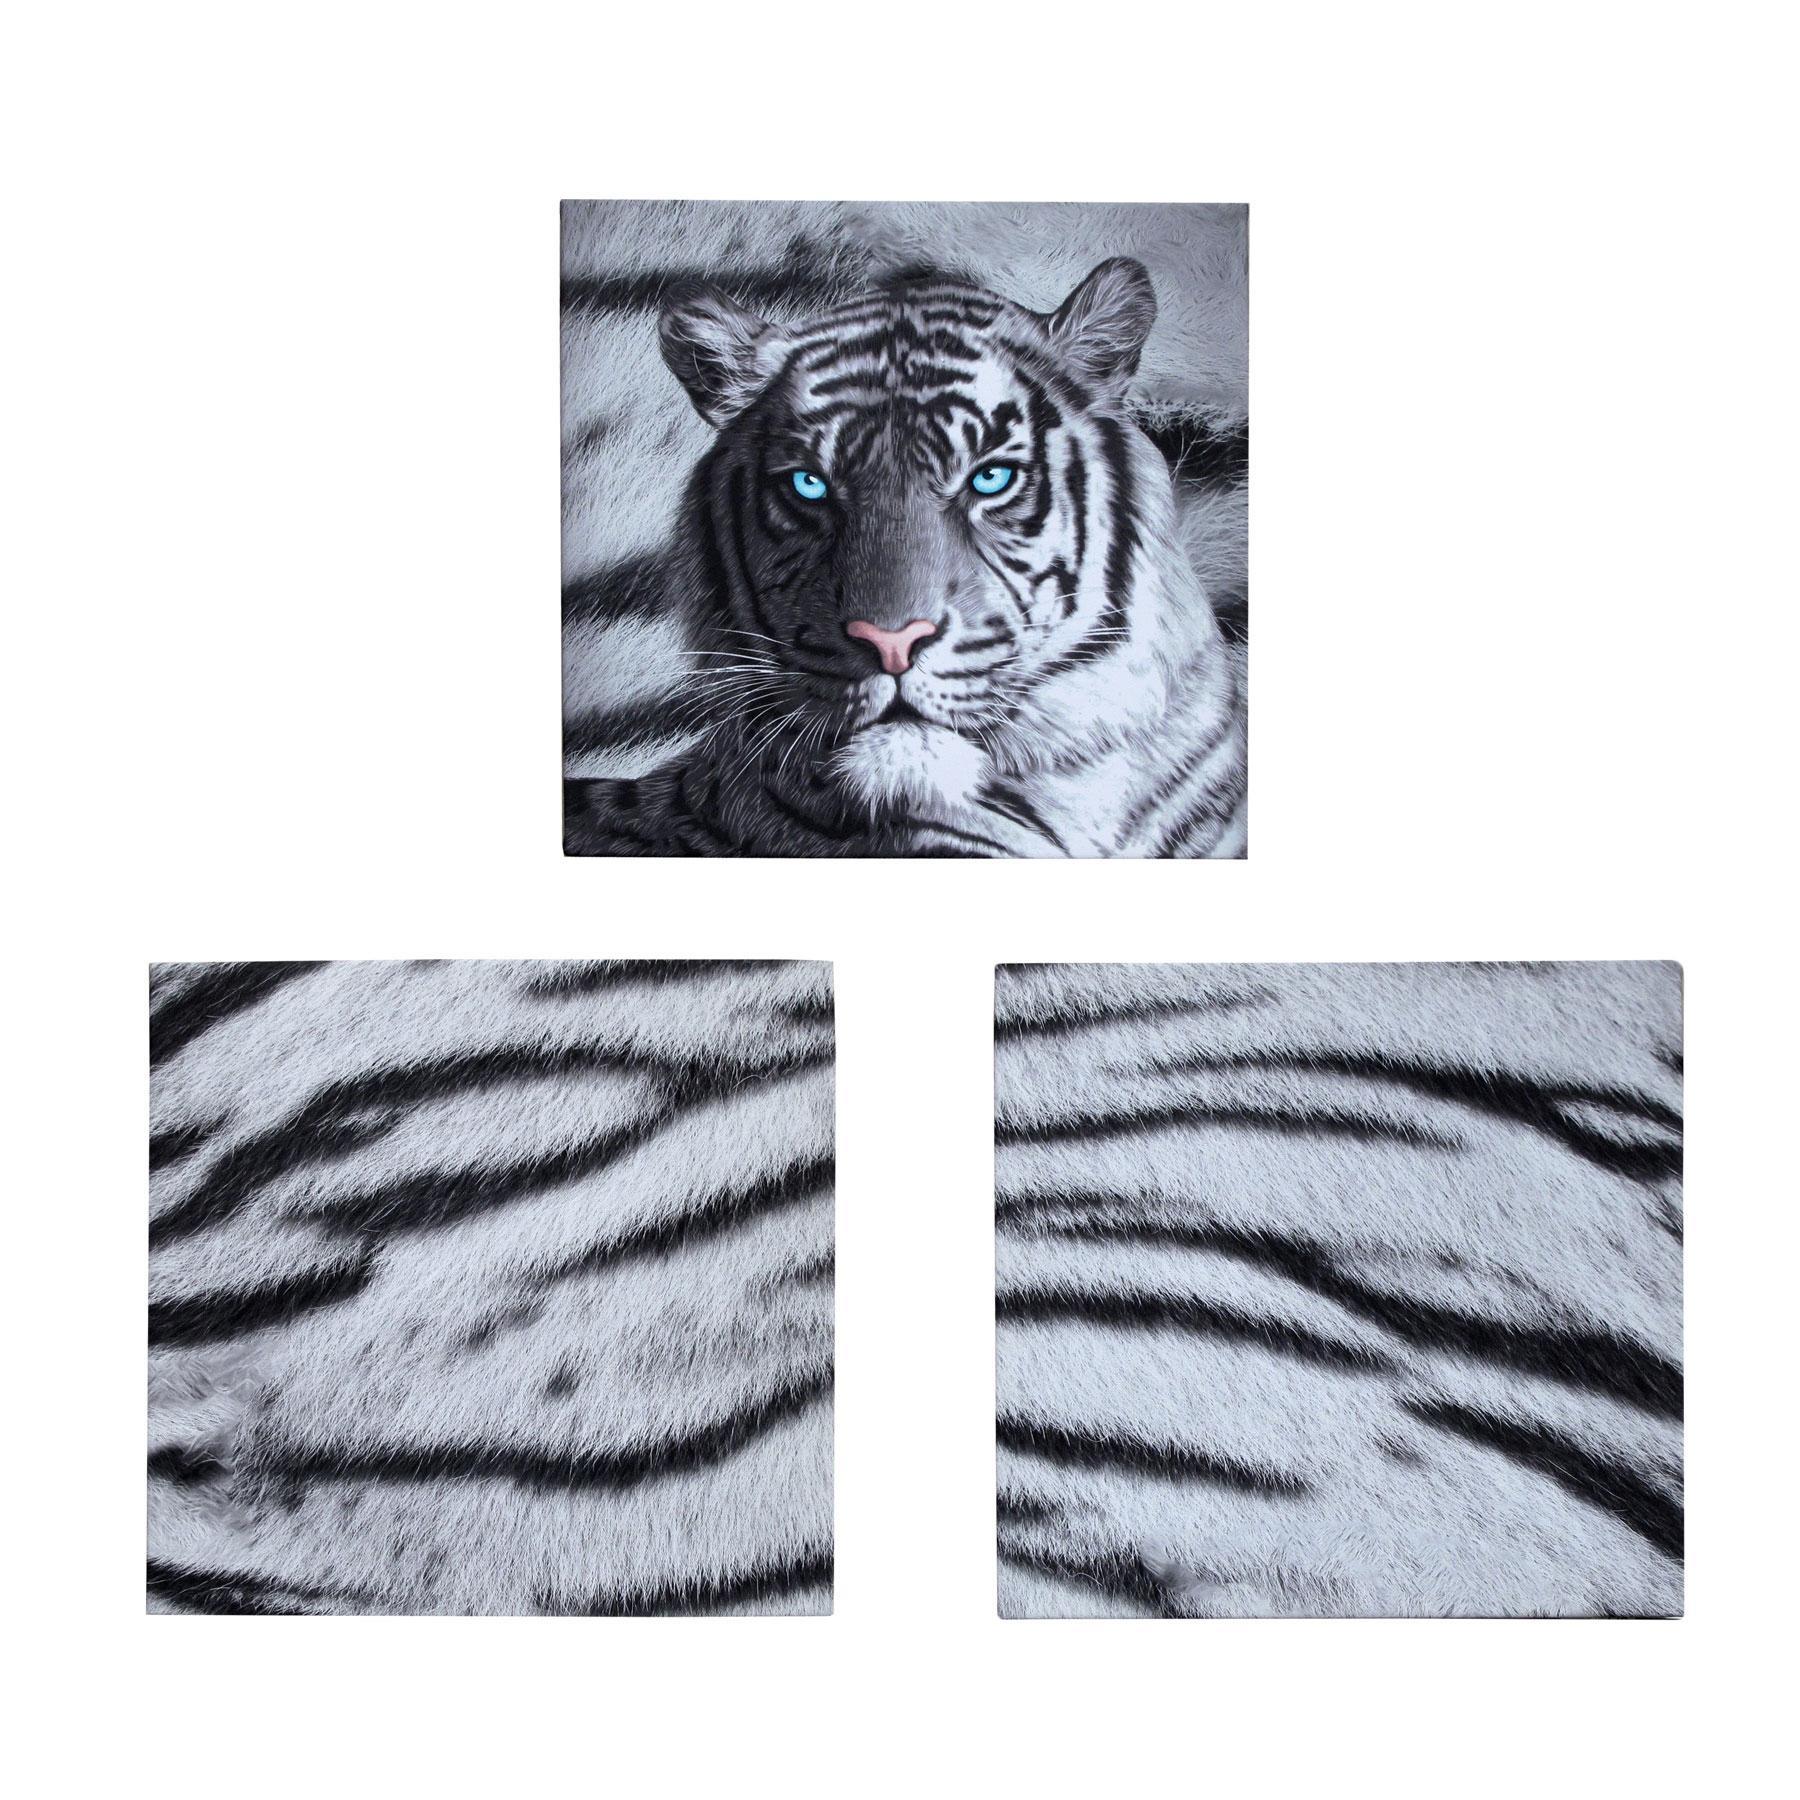 【Sale】Just Home Set of 3 Printed Blue Eyes Stripes Tiger Wall Canvas